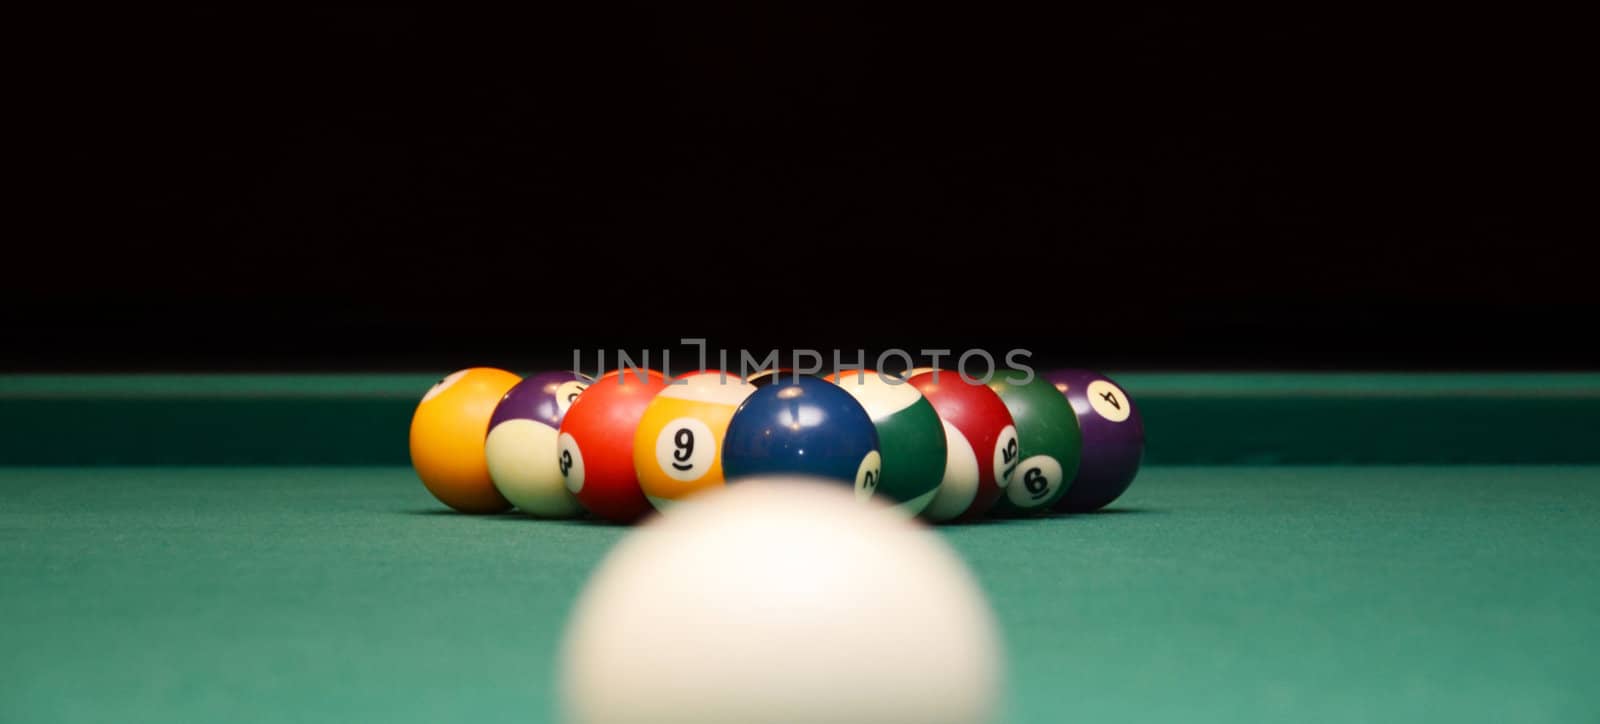 Pool balls on pool table







women shoes  on white background